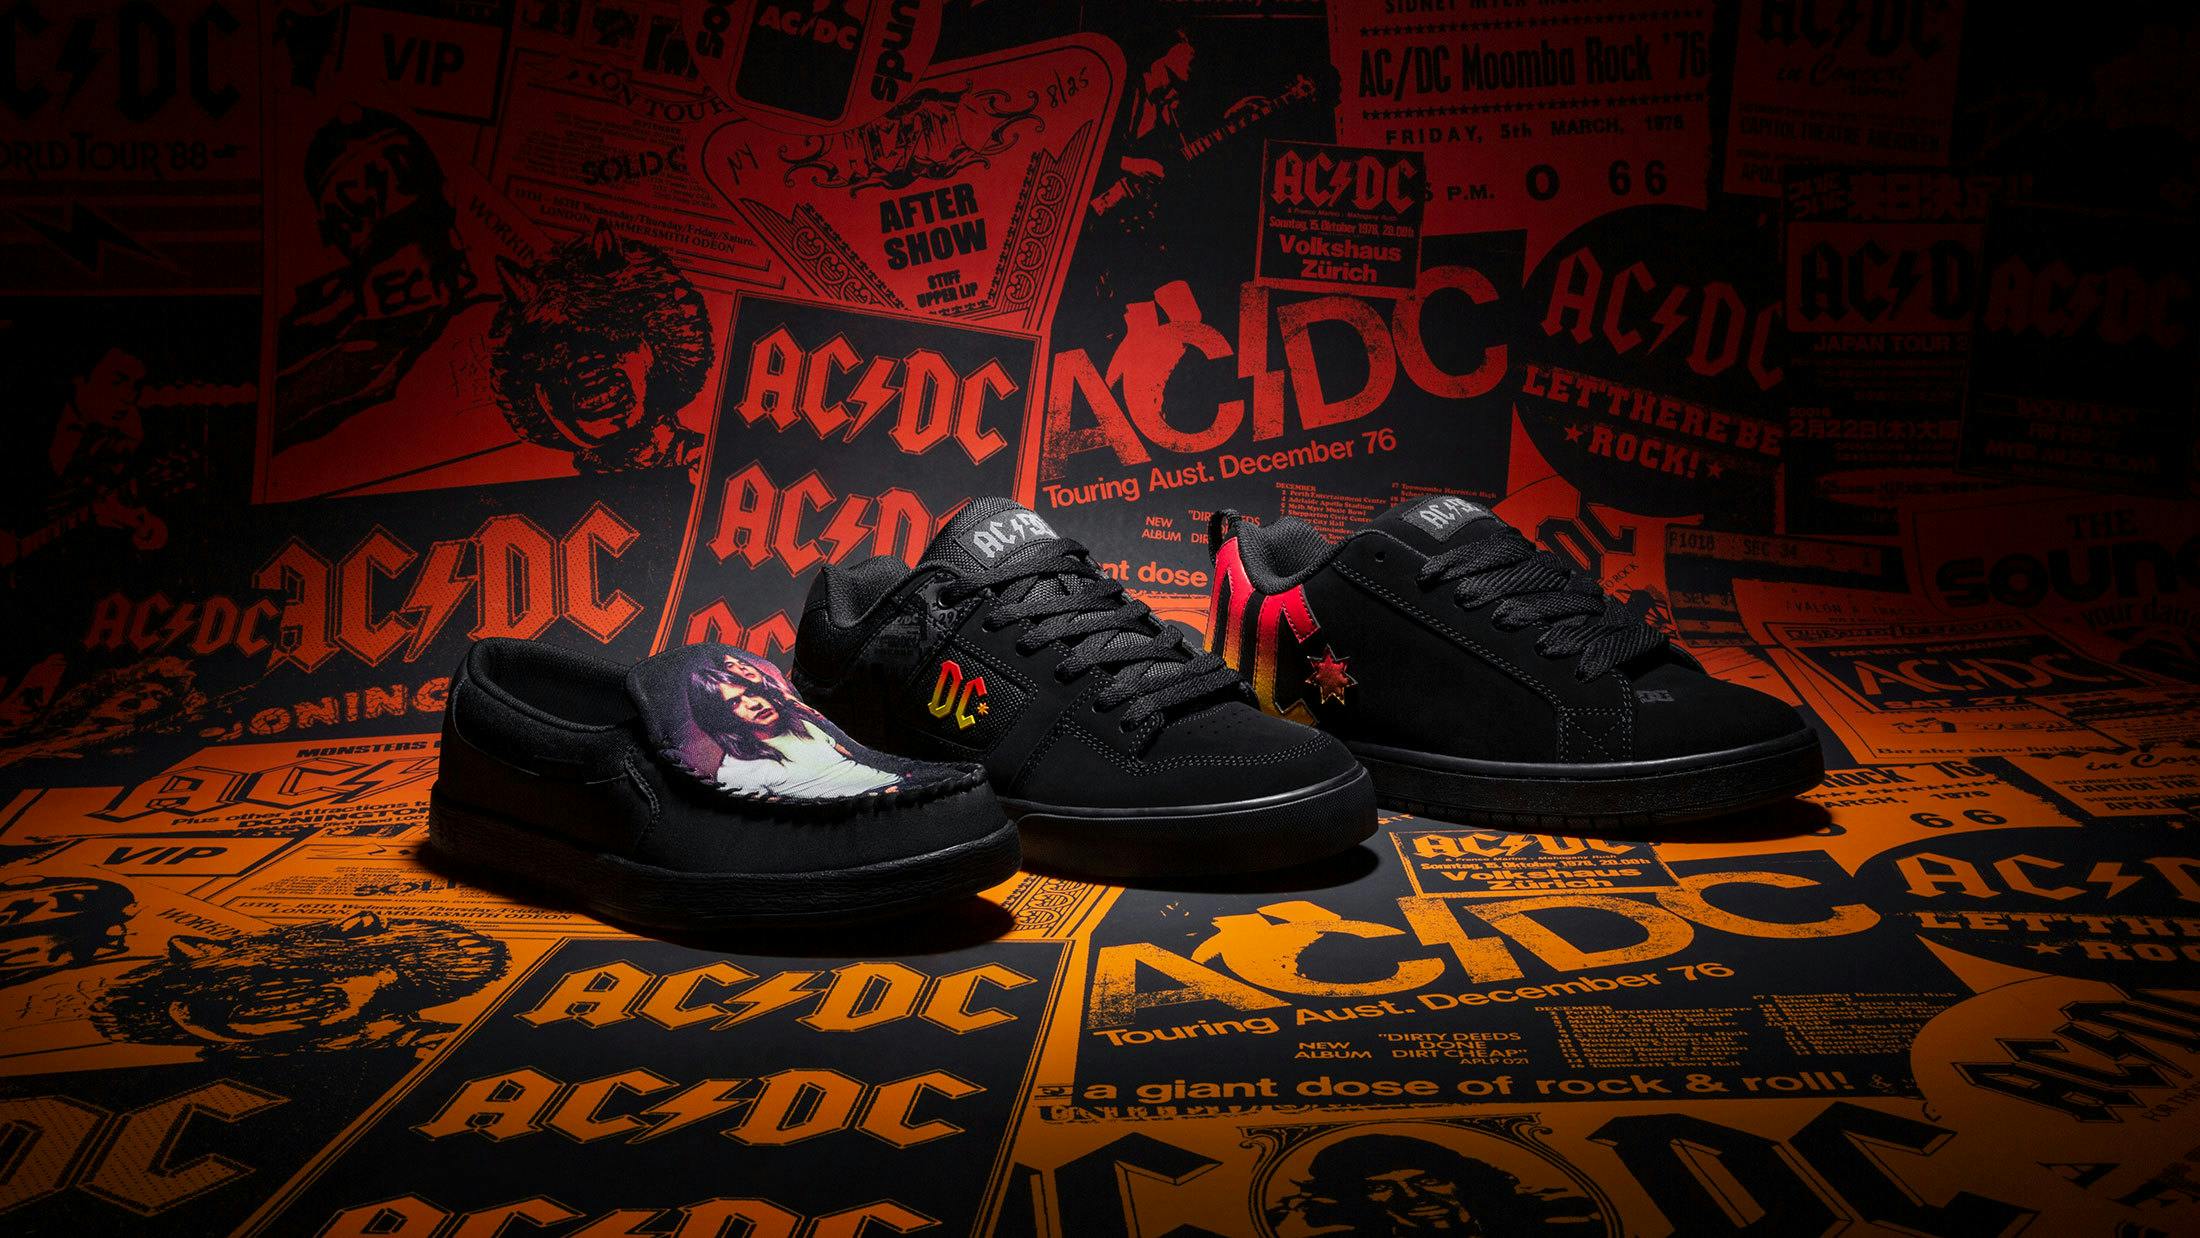 DC Shoes Release Awesome New AC/DC Collab